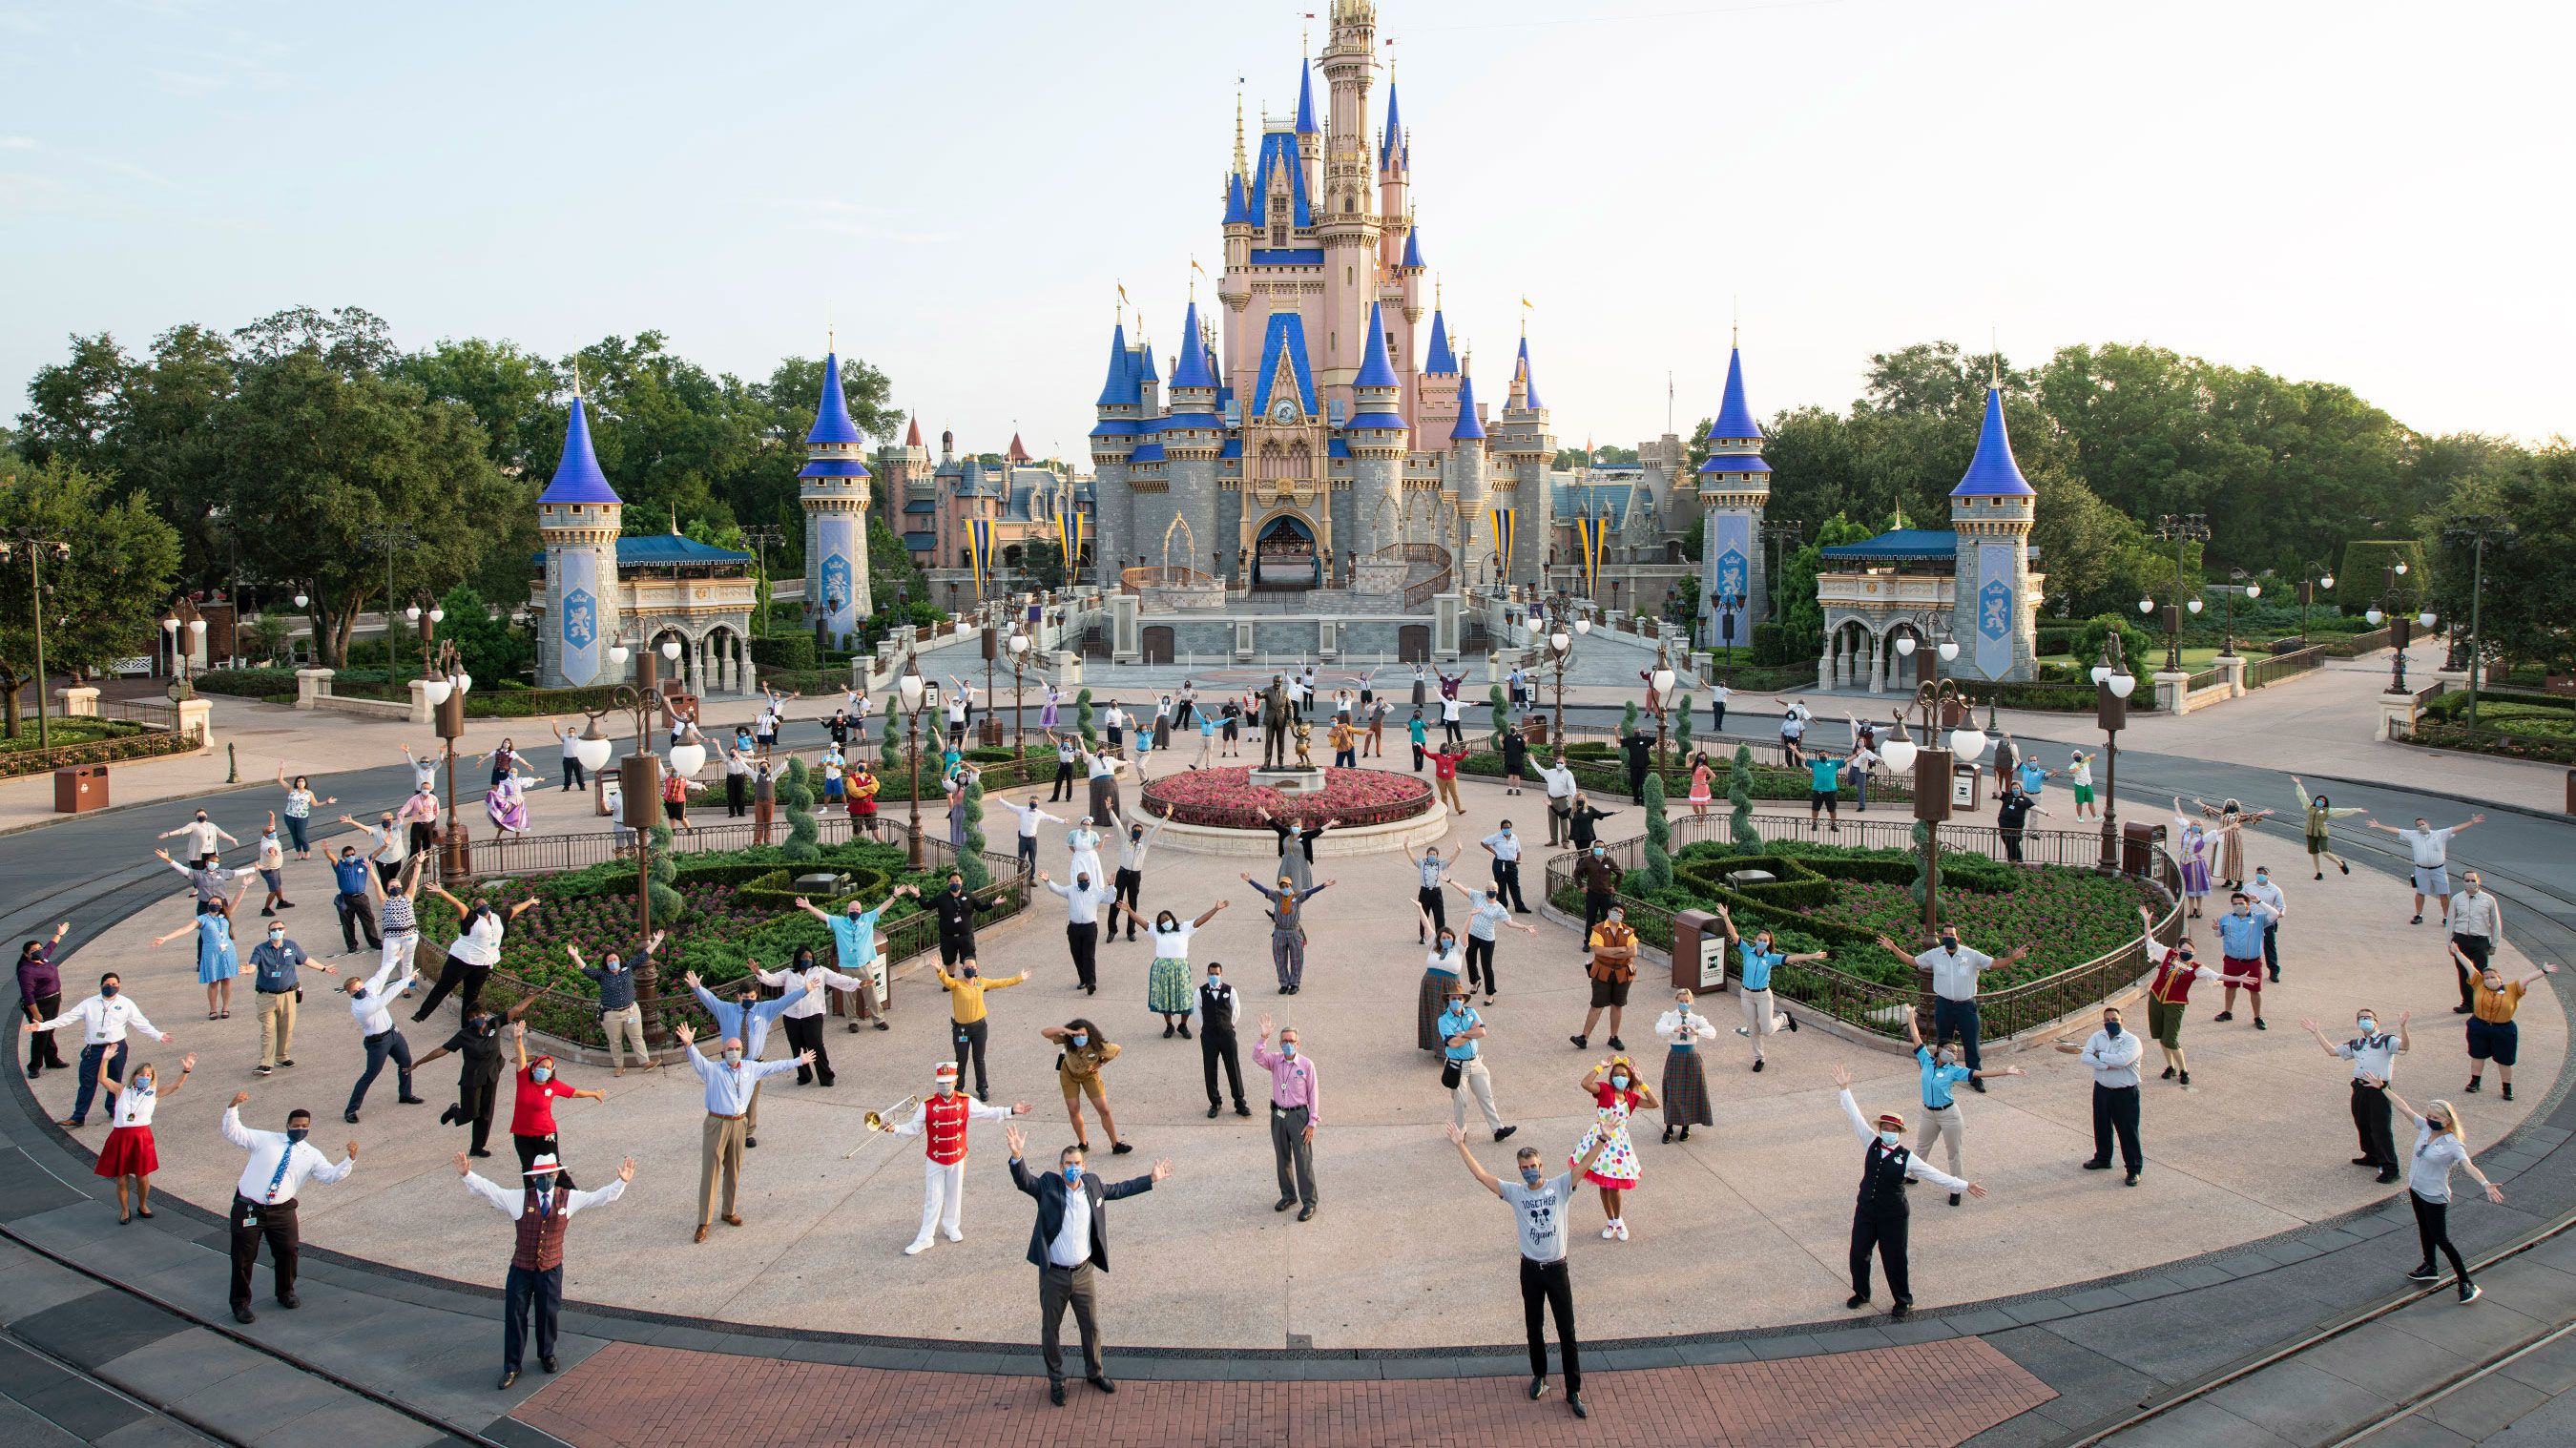 7 takeaways from Disney World's July reopening